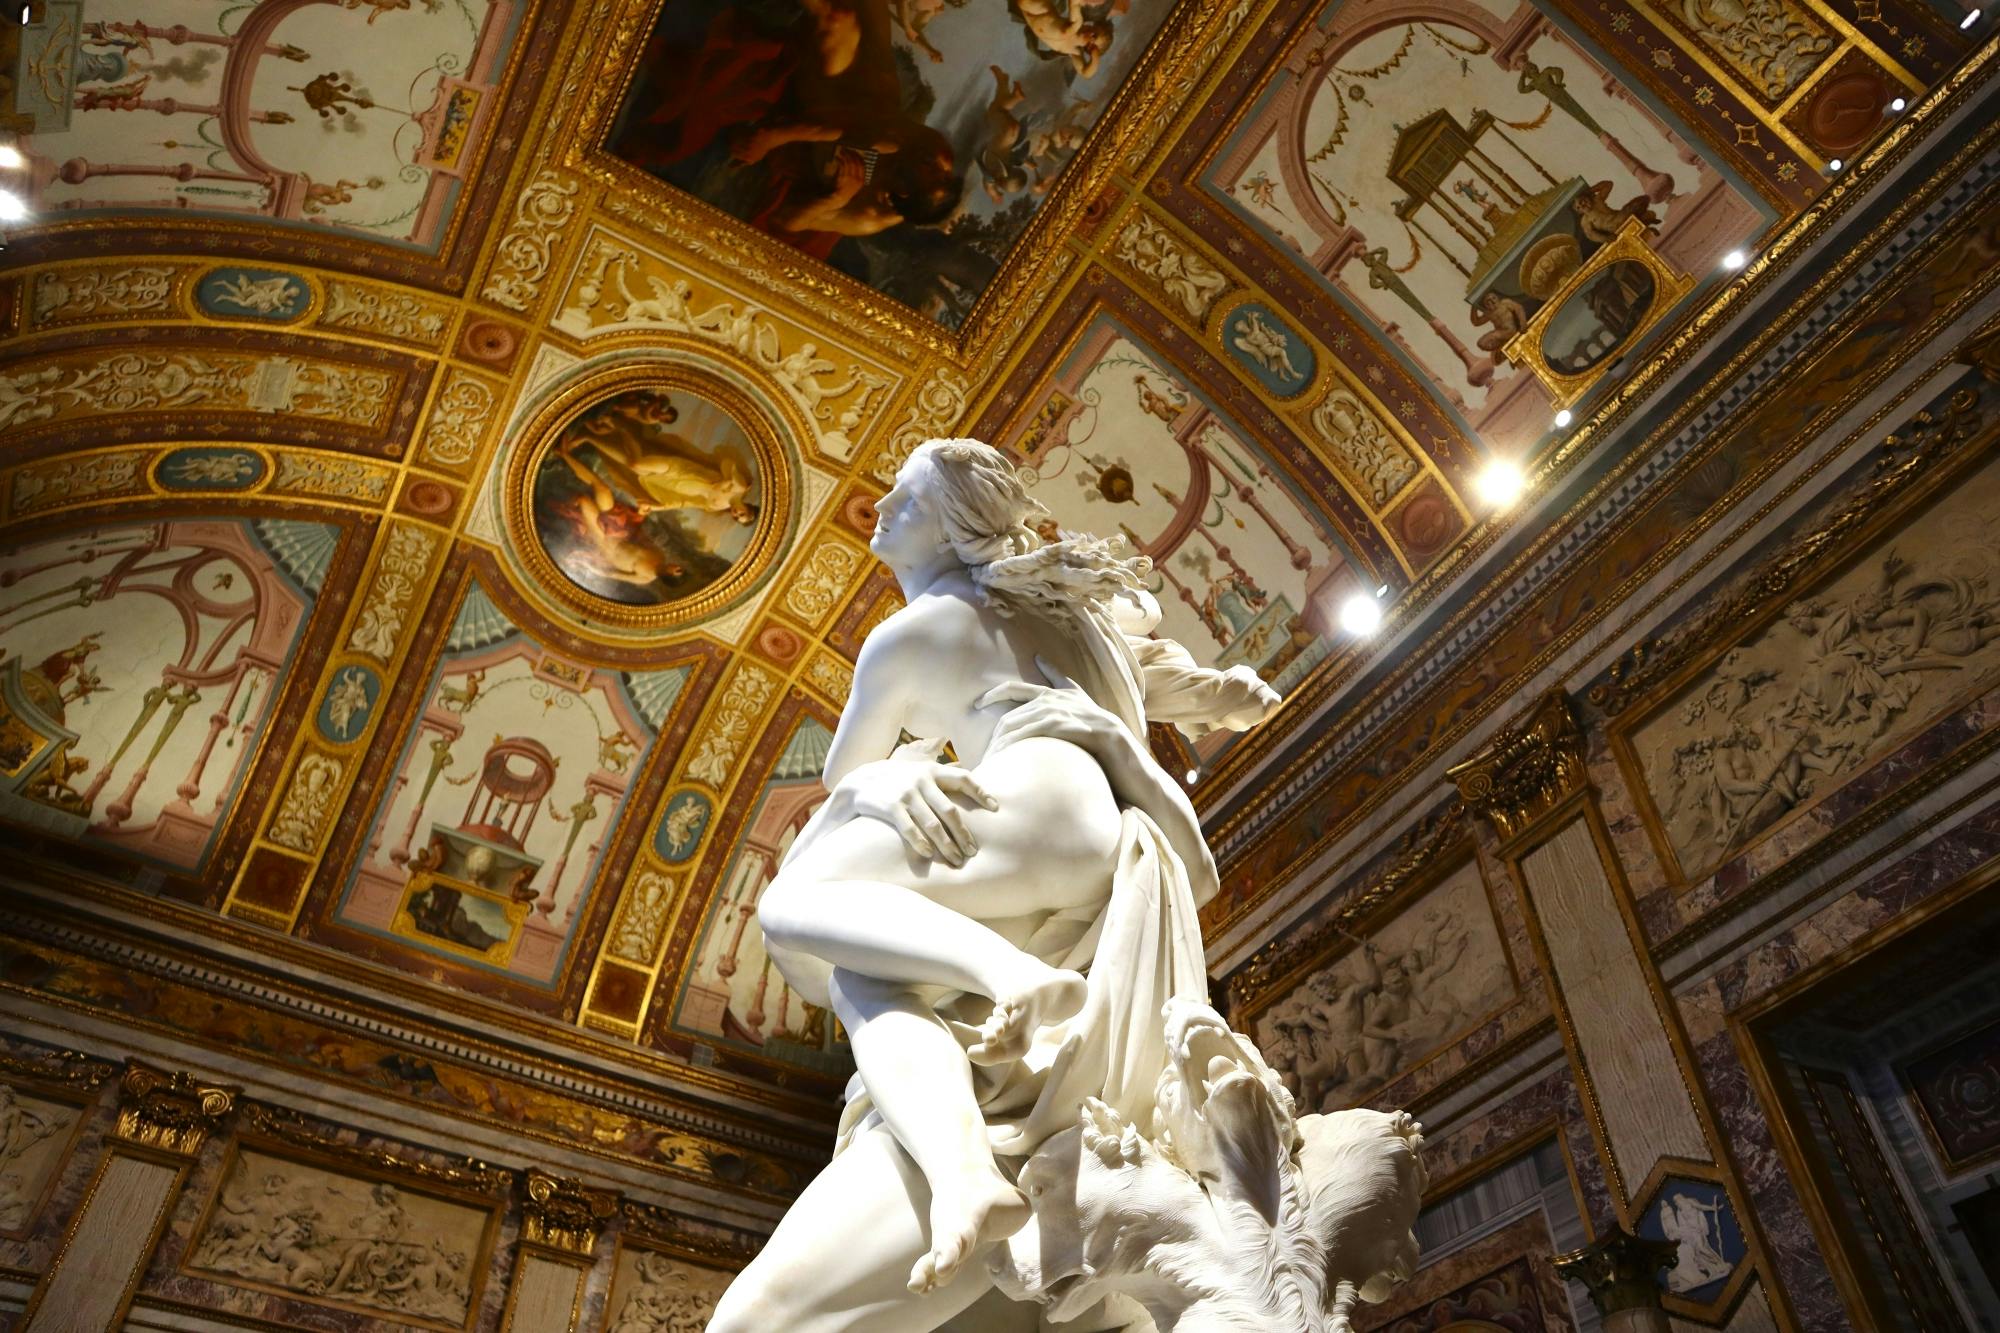 Borghese Gallery skip-the-line tickets and Gardens golf cart tour